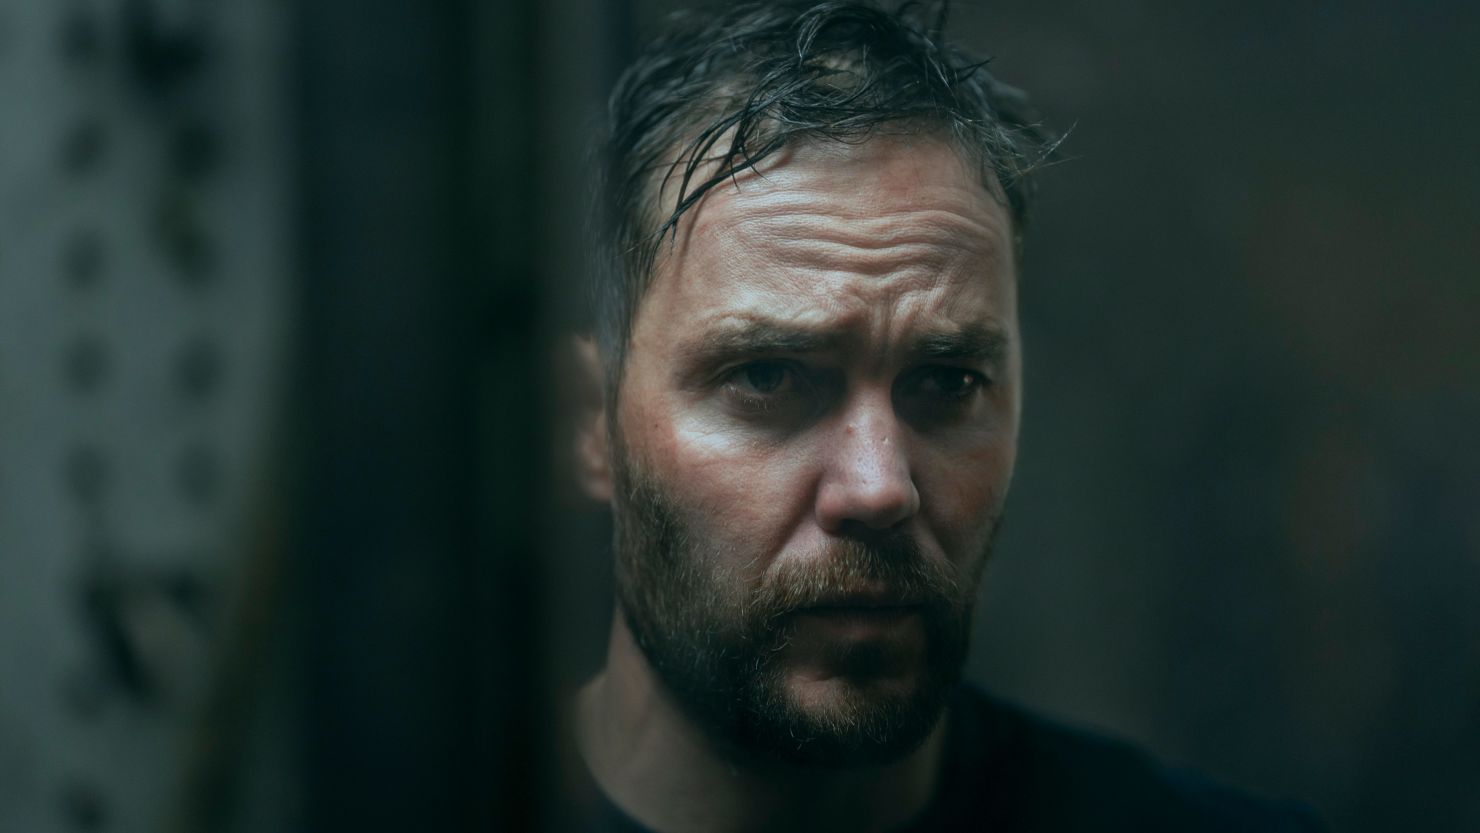 Taylor Kitsch plays a man struggling with opioid addiction in the Netflix limited series "Painkiller."